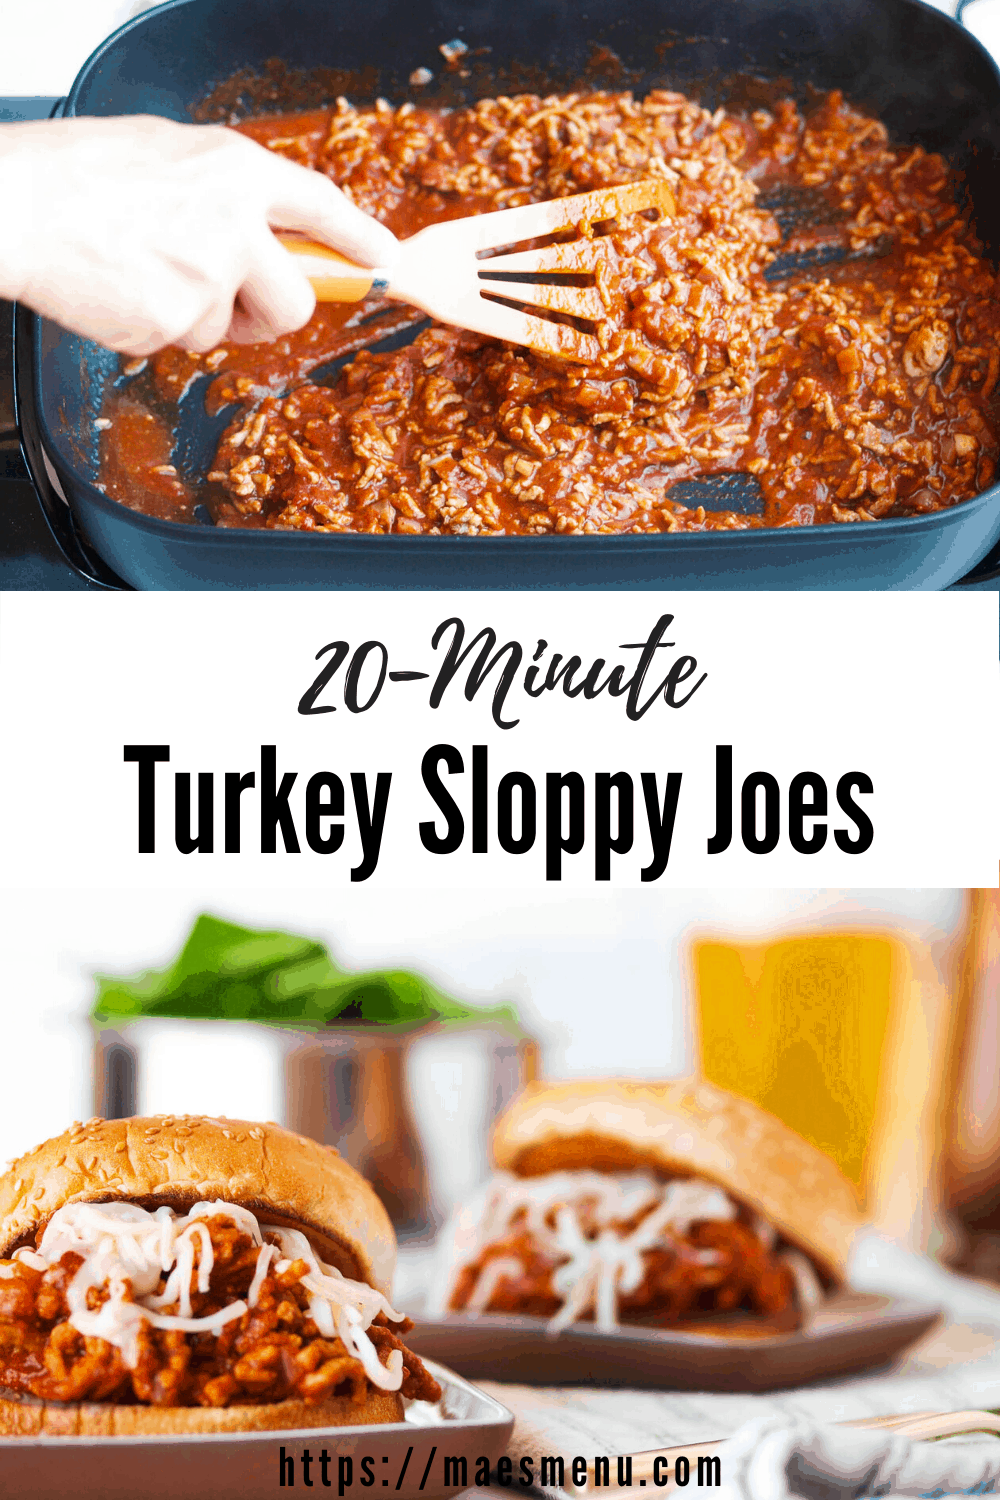 My pinterest pin for 20-minute turkey sloppy joes -- on the top is a skillet of the sloppy joe meet. On the bottom are two plates of sloppy joes sitting on top of a dish towel in front of salad and a glass of beer. 